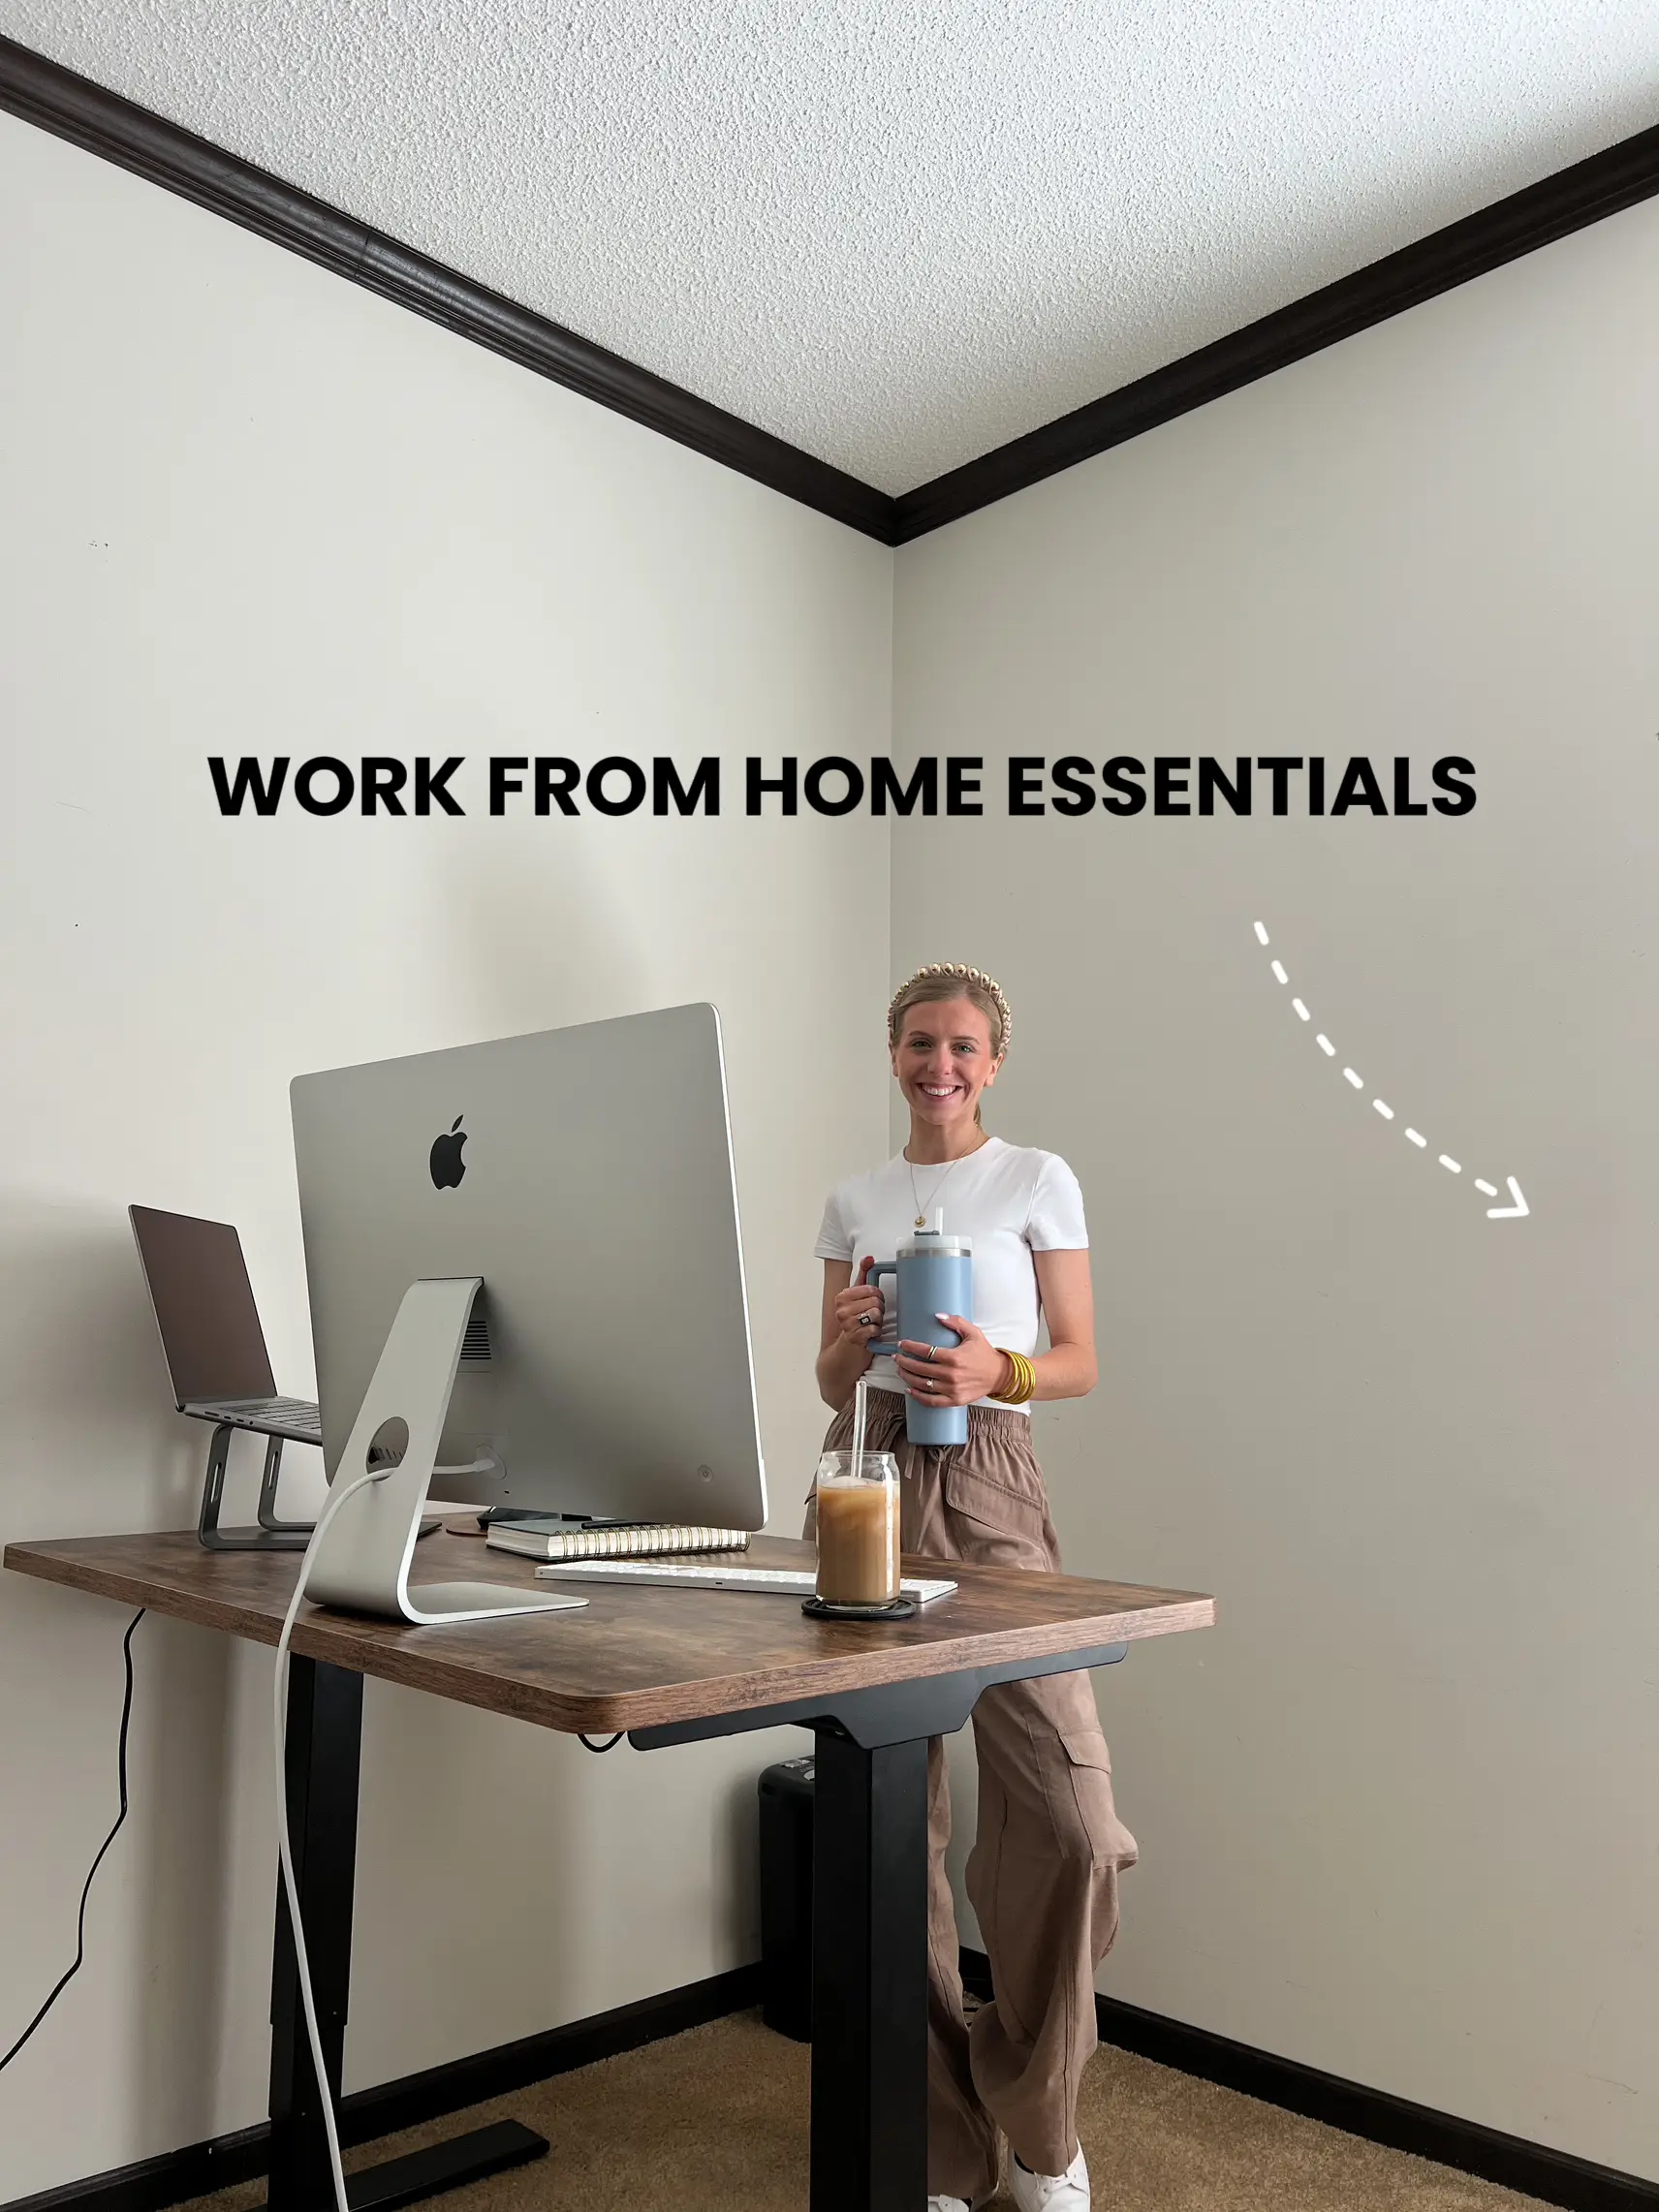 WORK FROM HOME ESSENTIALS⤵️, Gallery posted by Chloe Thomas